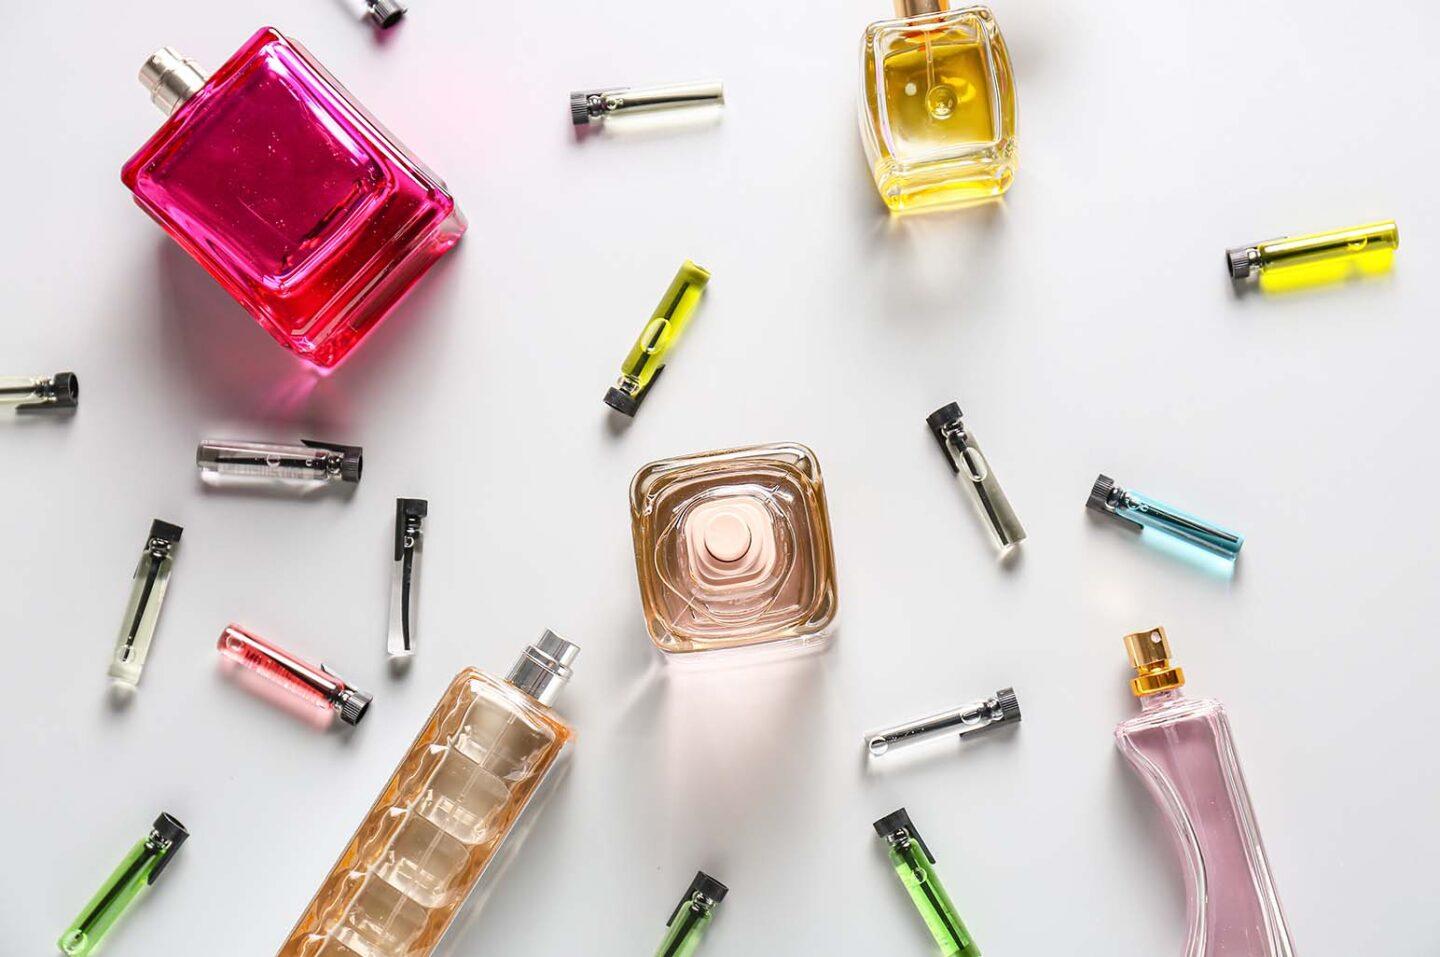 Why Sampling Scents is Crucial Before Buying Perfume